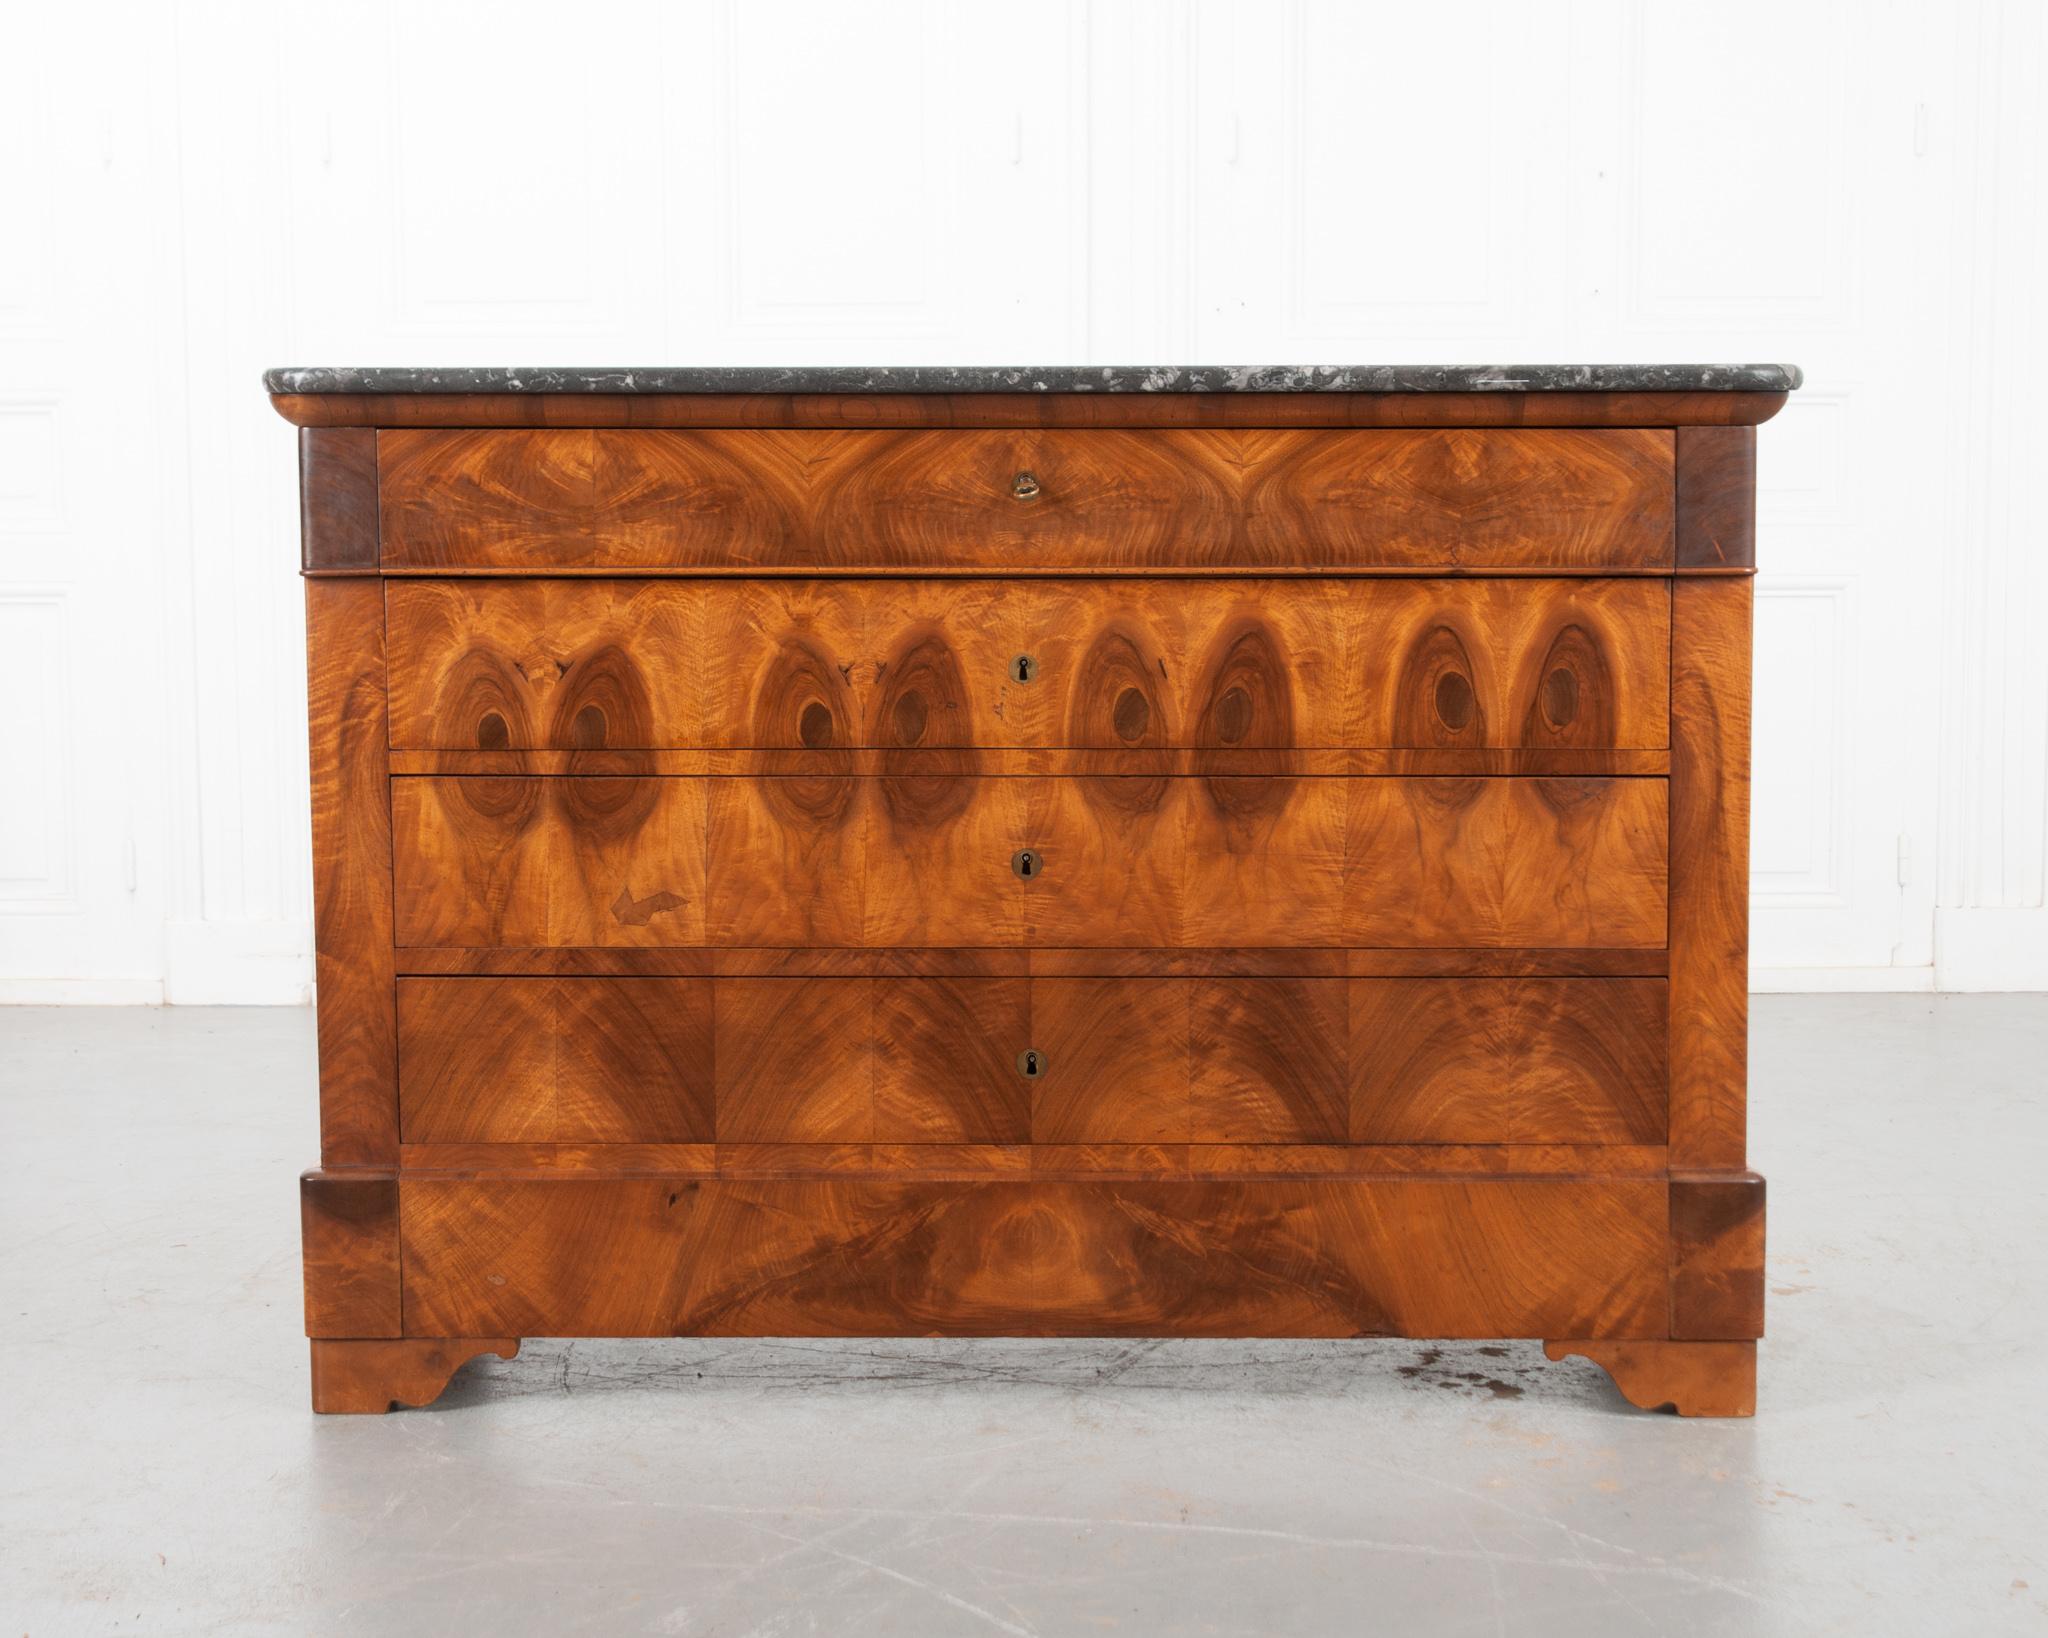 A classic Louis Philippe-styled four-drawer mahogany commode from 19th century France. The case antique has a beautiful gray marble top, with rounded front corners to match the base. The apron contains a hidden lockable drawer. The three